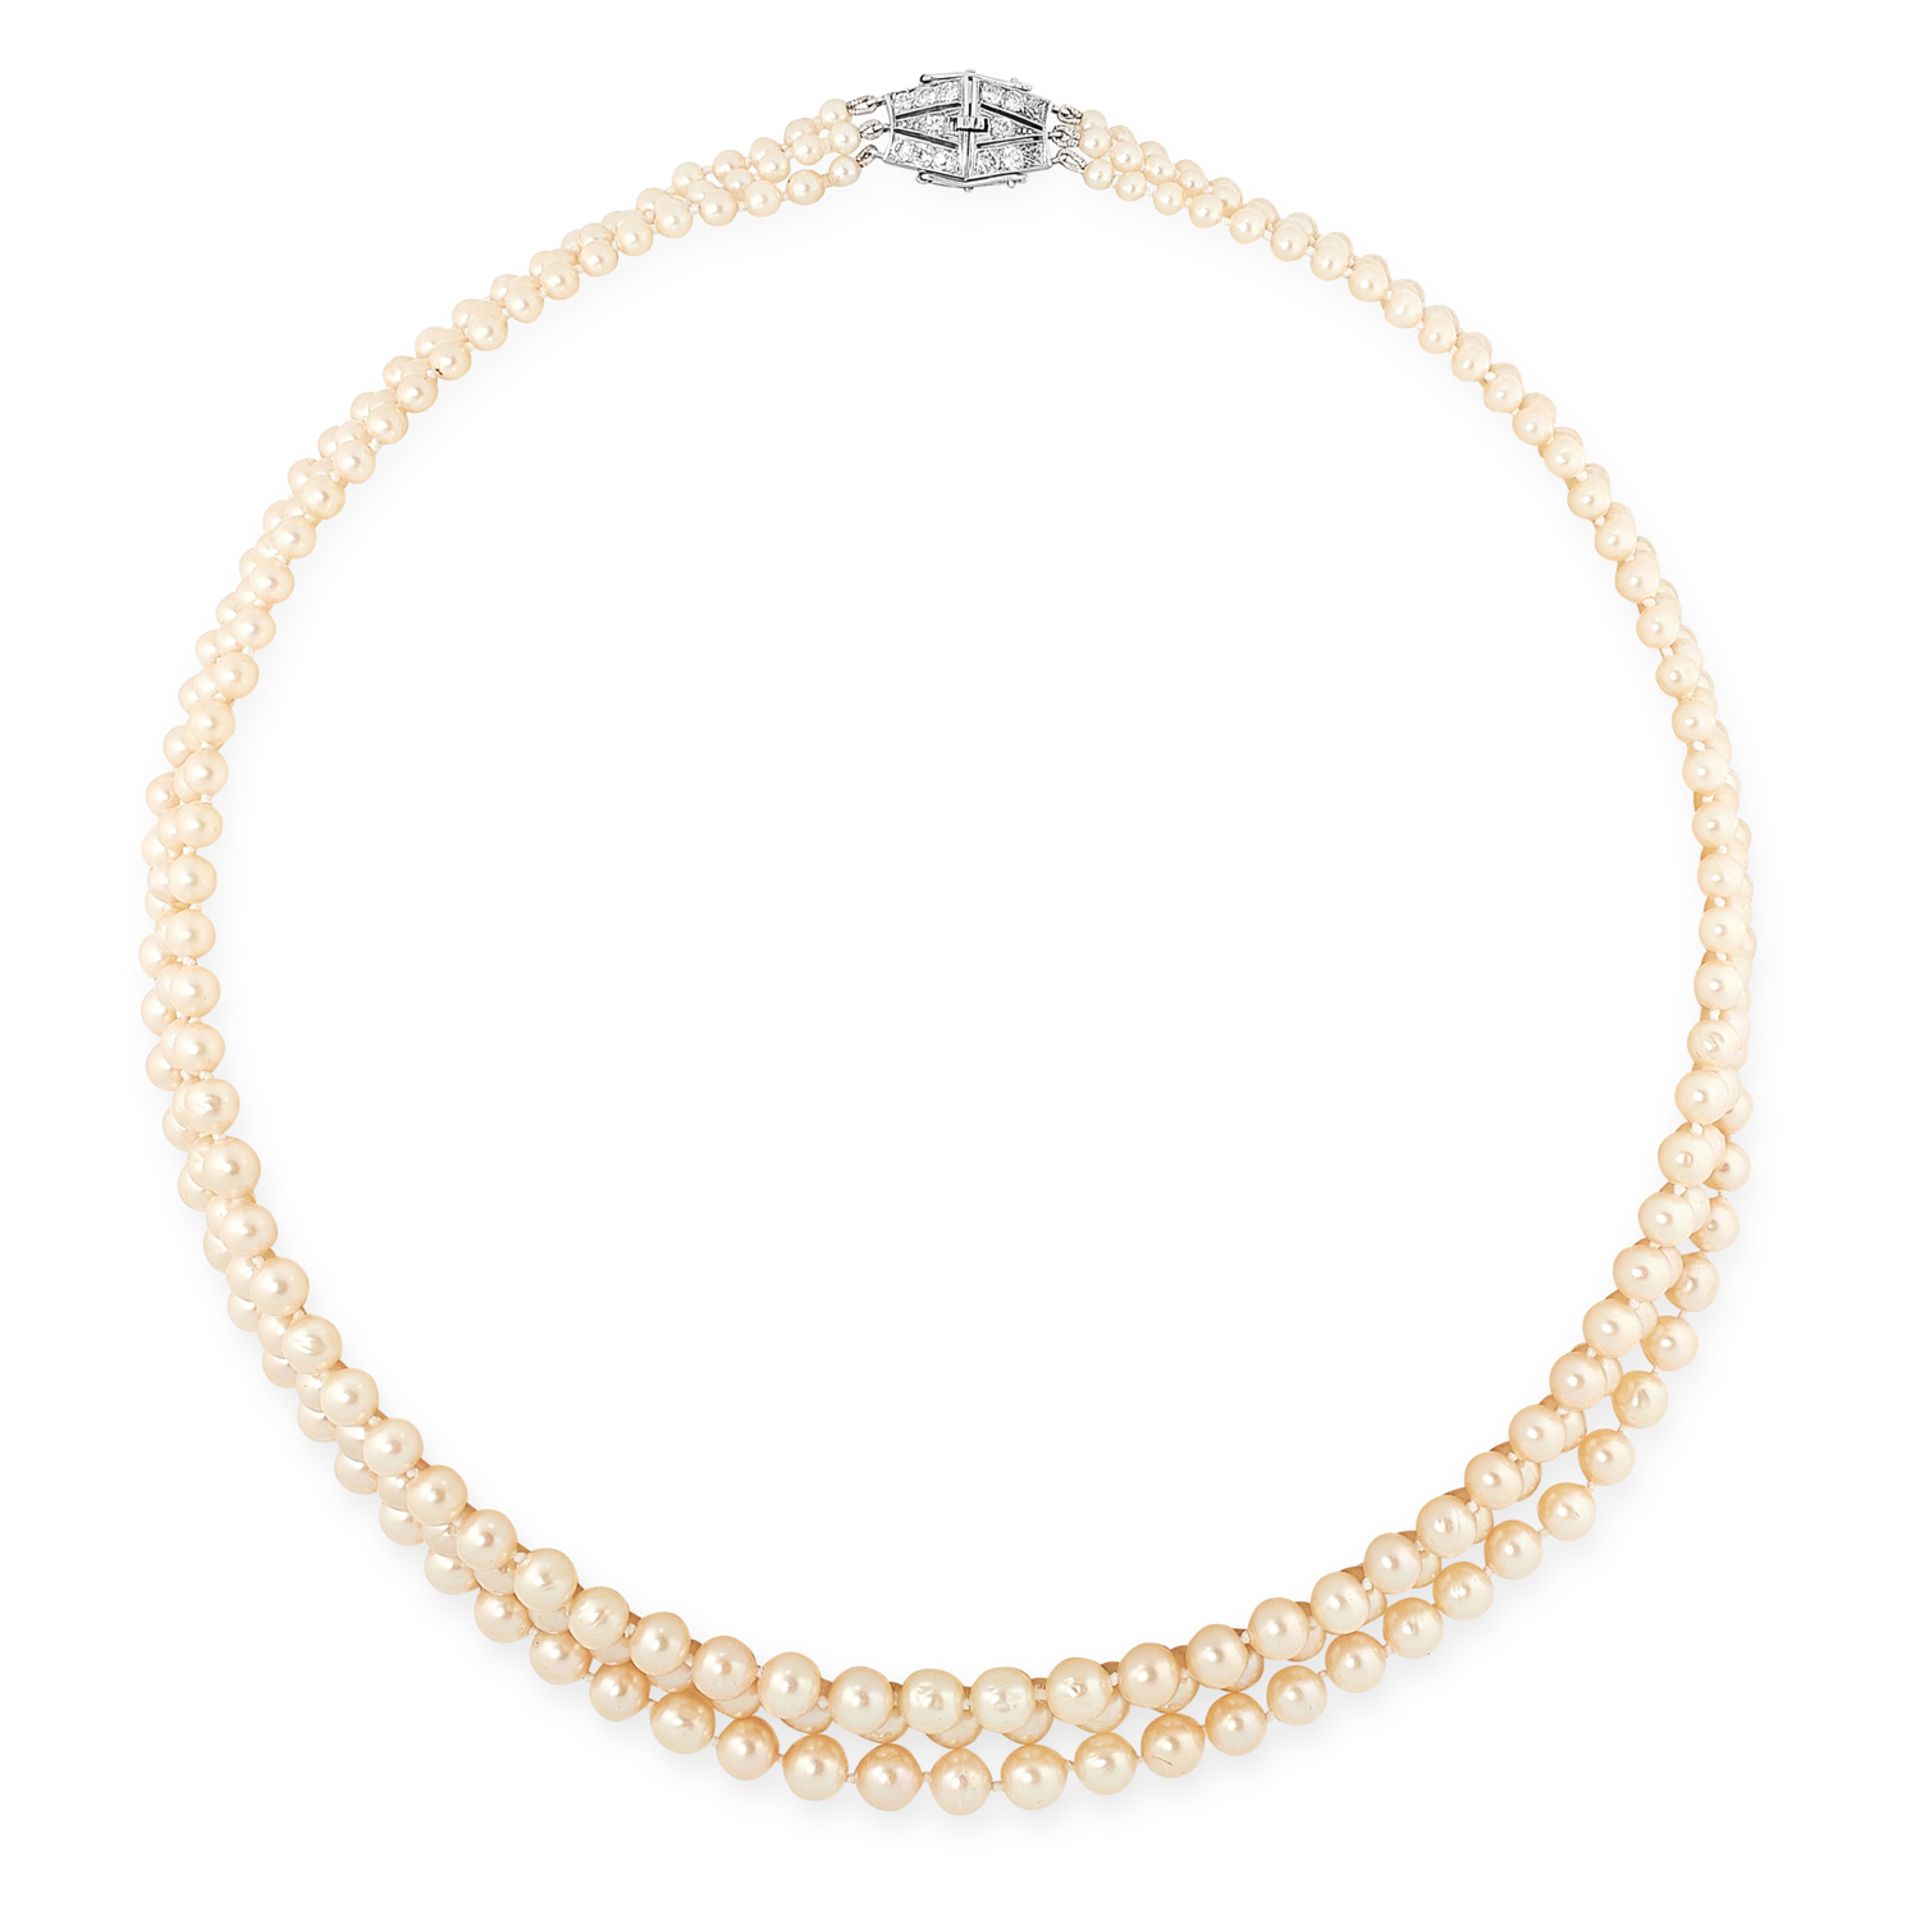 A THREE ROW PEARL AND DIAMOND NECKLACE, CIRCA 1950 in platinum, comprising three rows of graduated